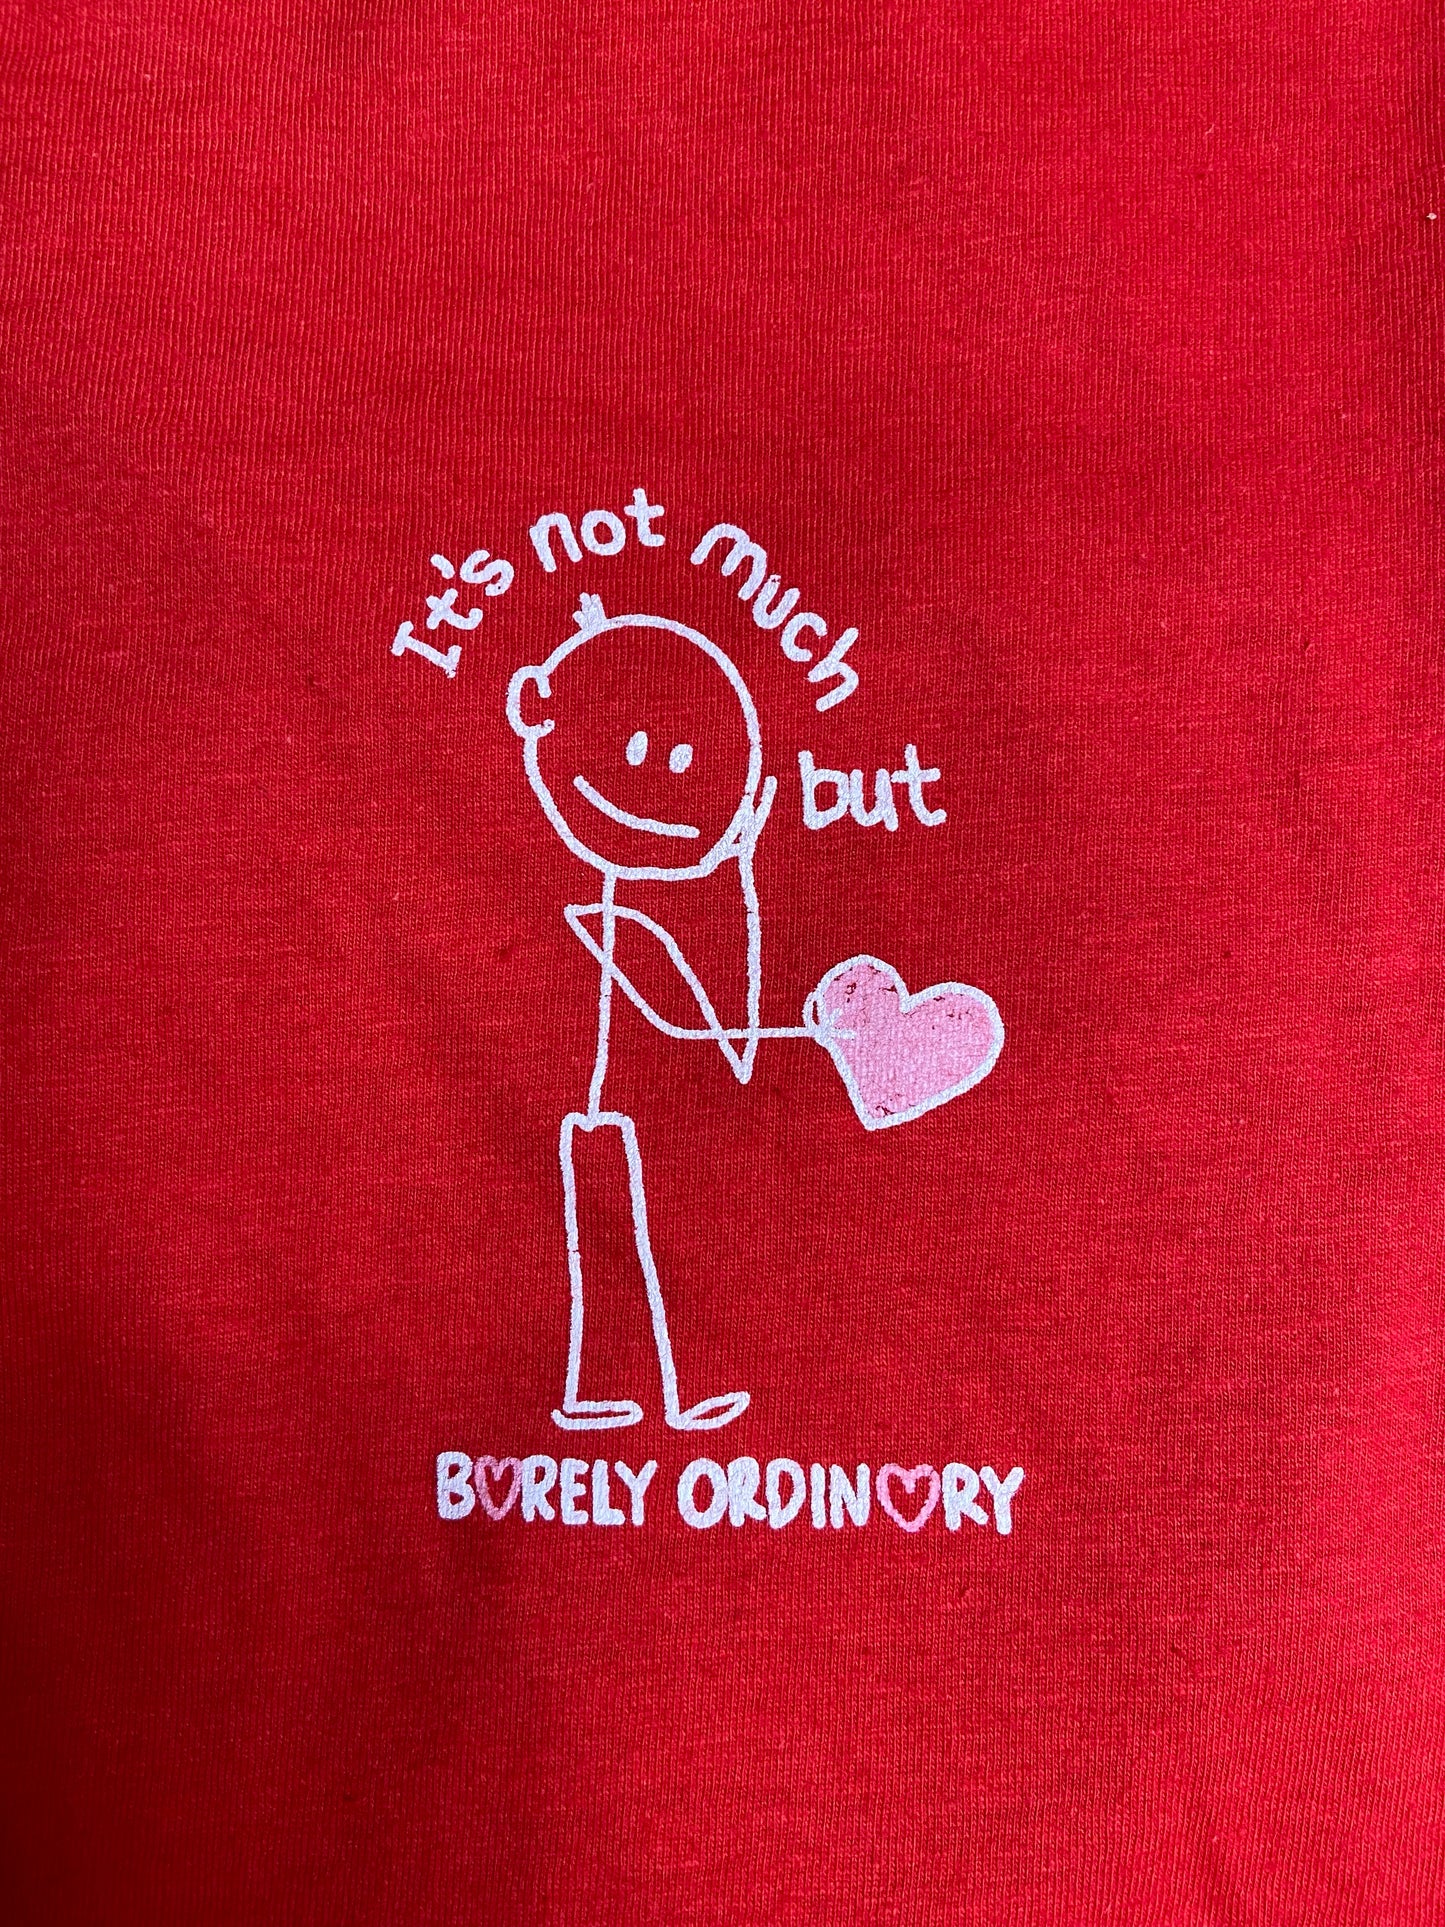 Barely "It’s not much" Tee - Red